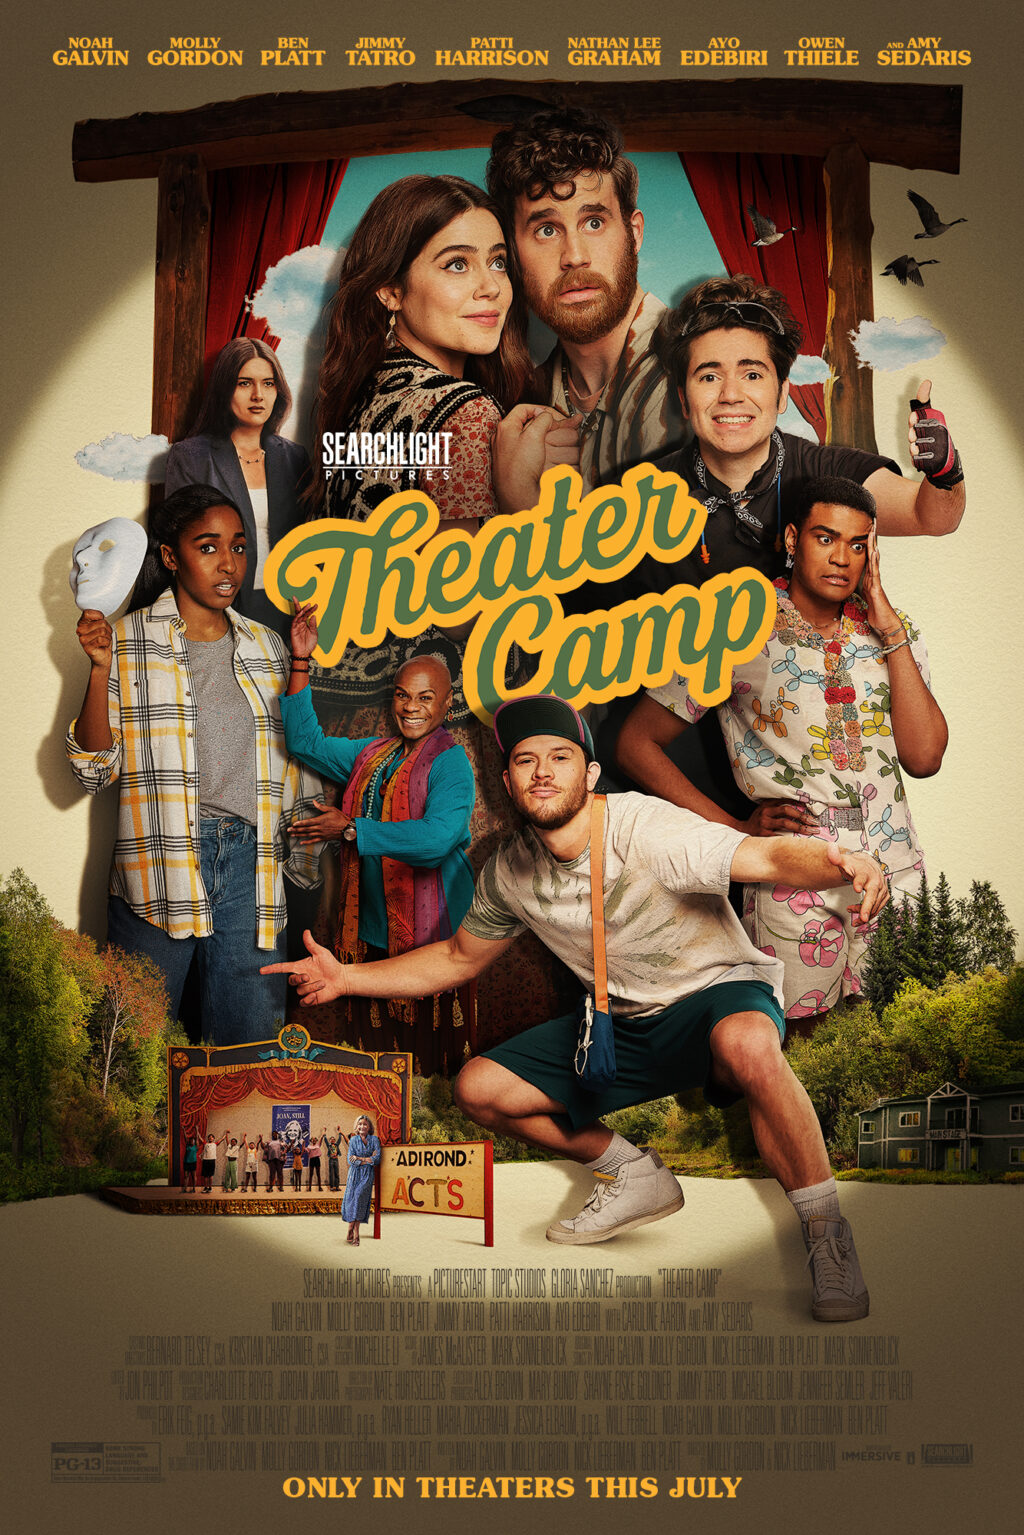 This month’s Mike Peros movie and TV reviews is all about Dumb Money and Theater Camp.